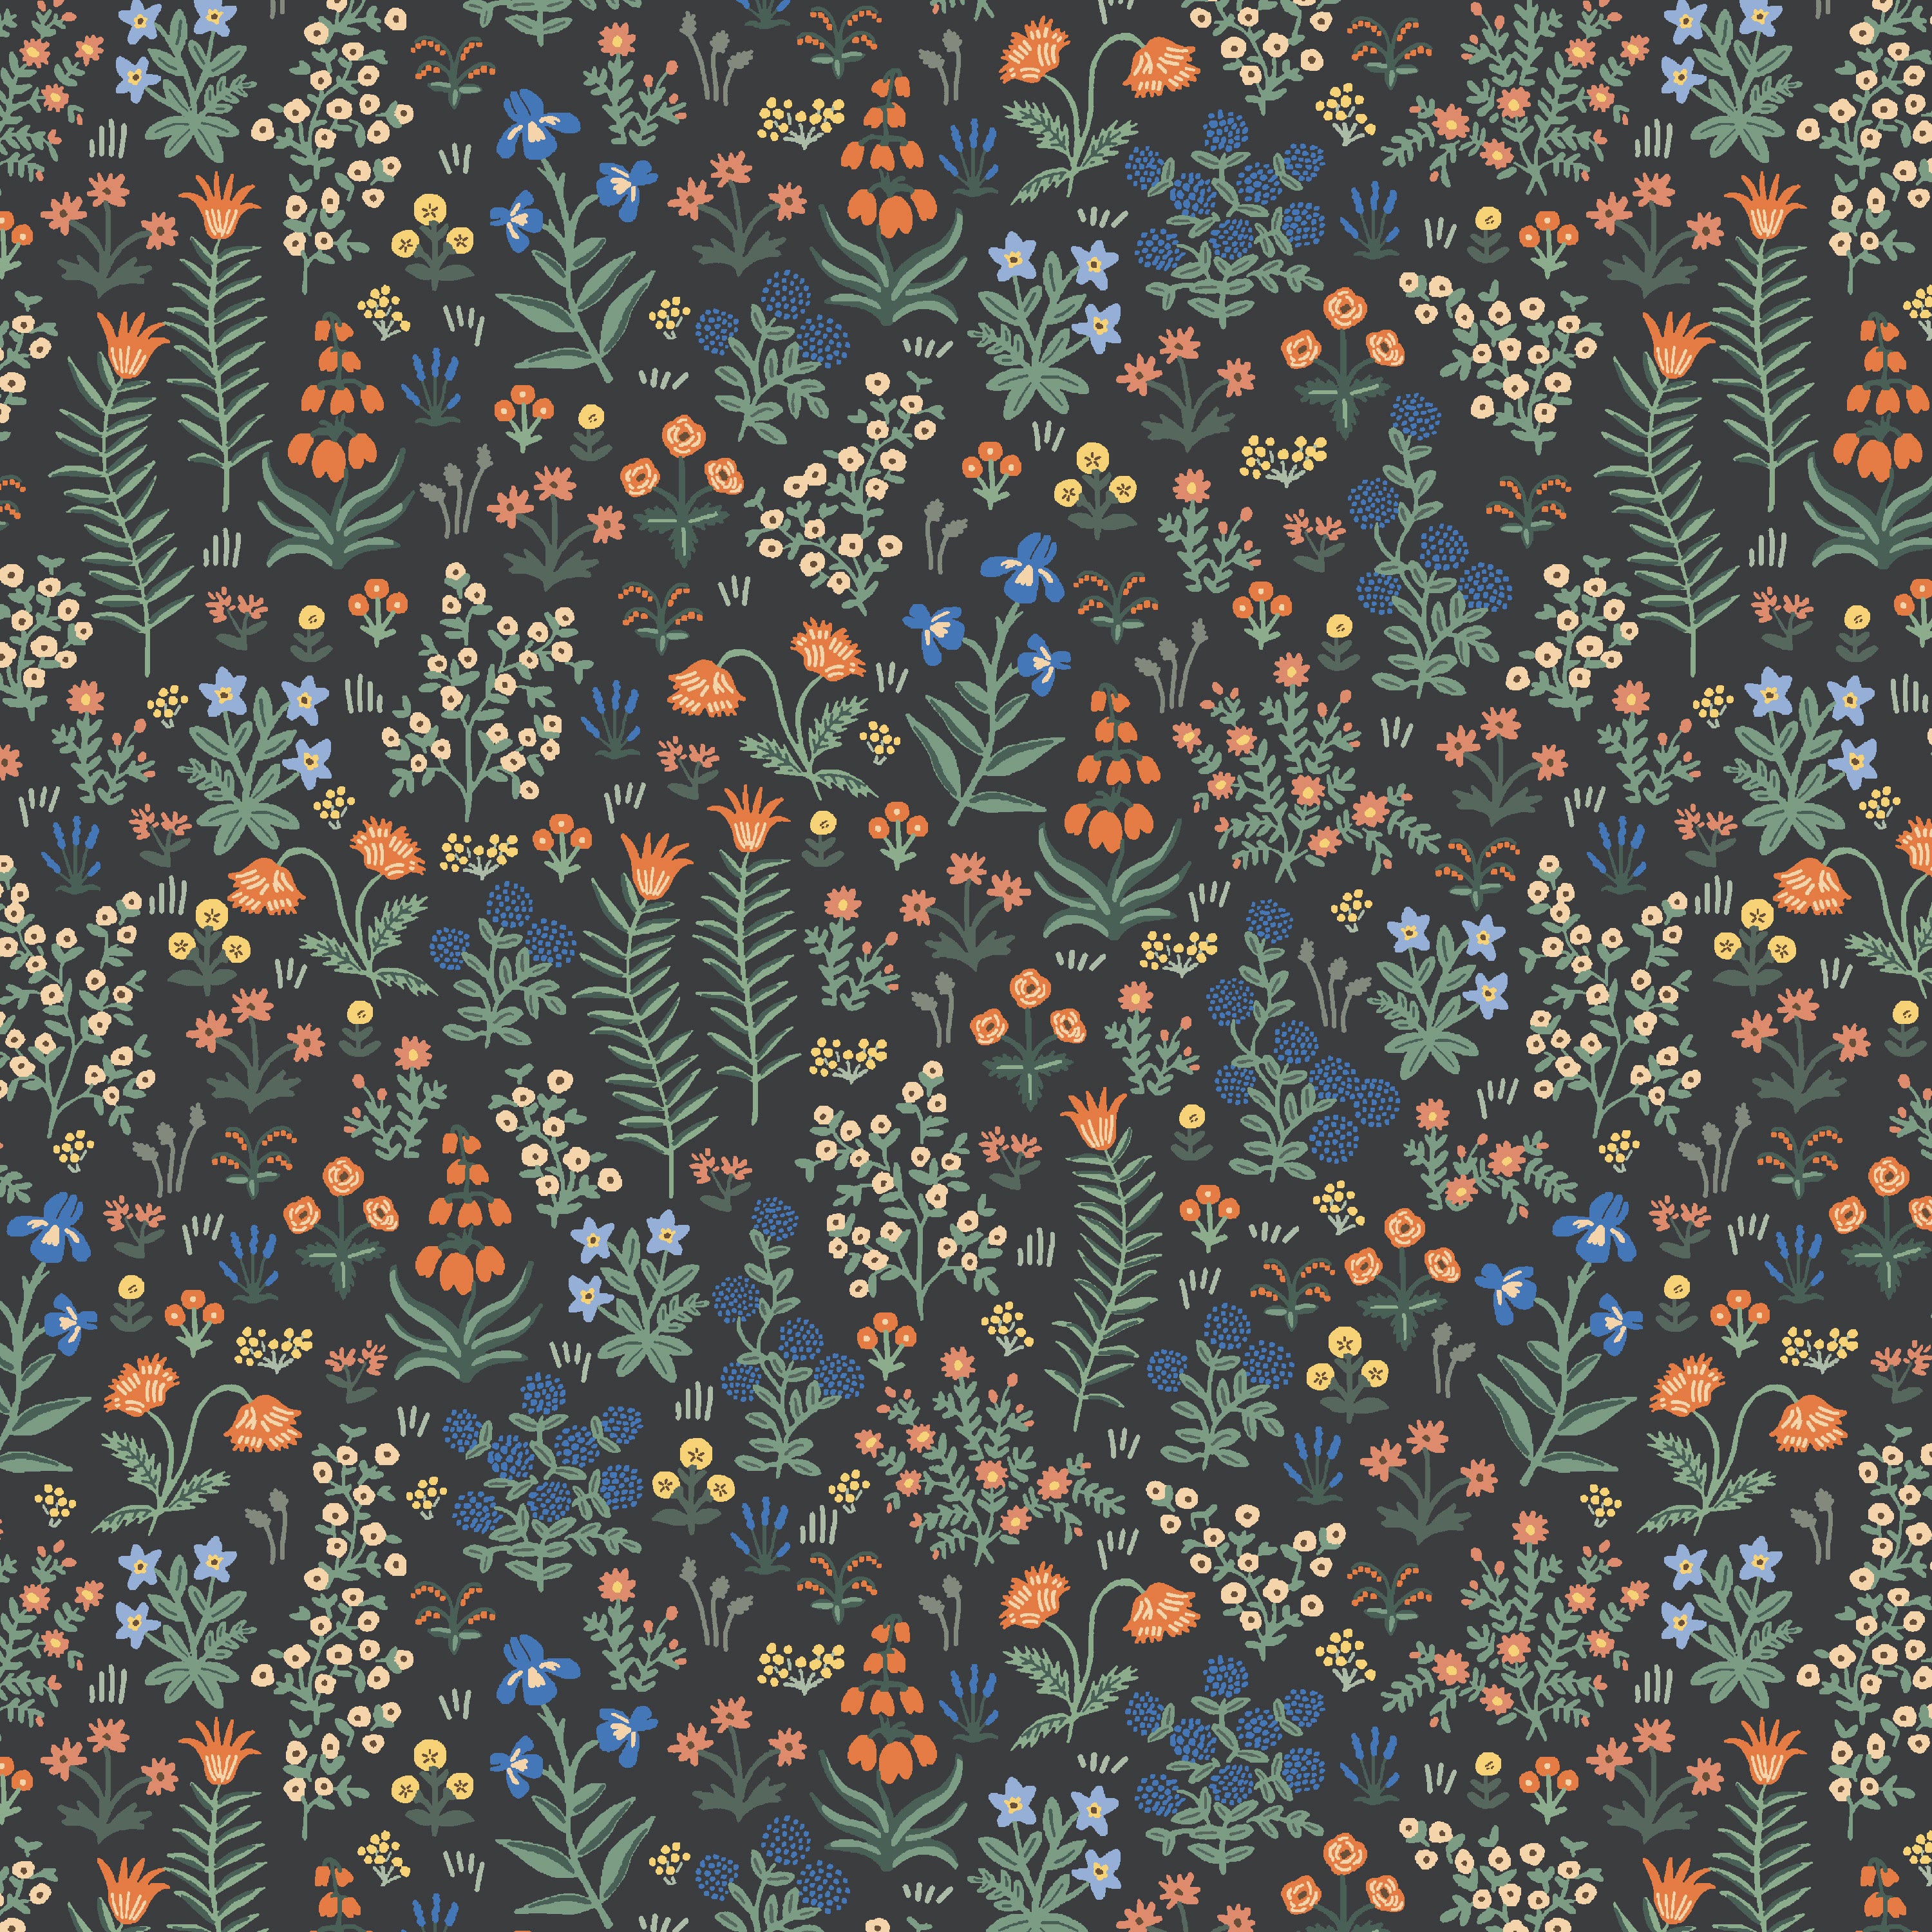 Menagerie Garden Black - Camont by Rifle Paper Co